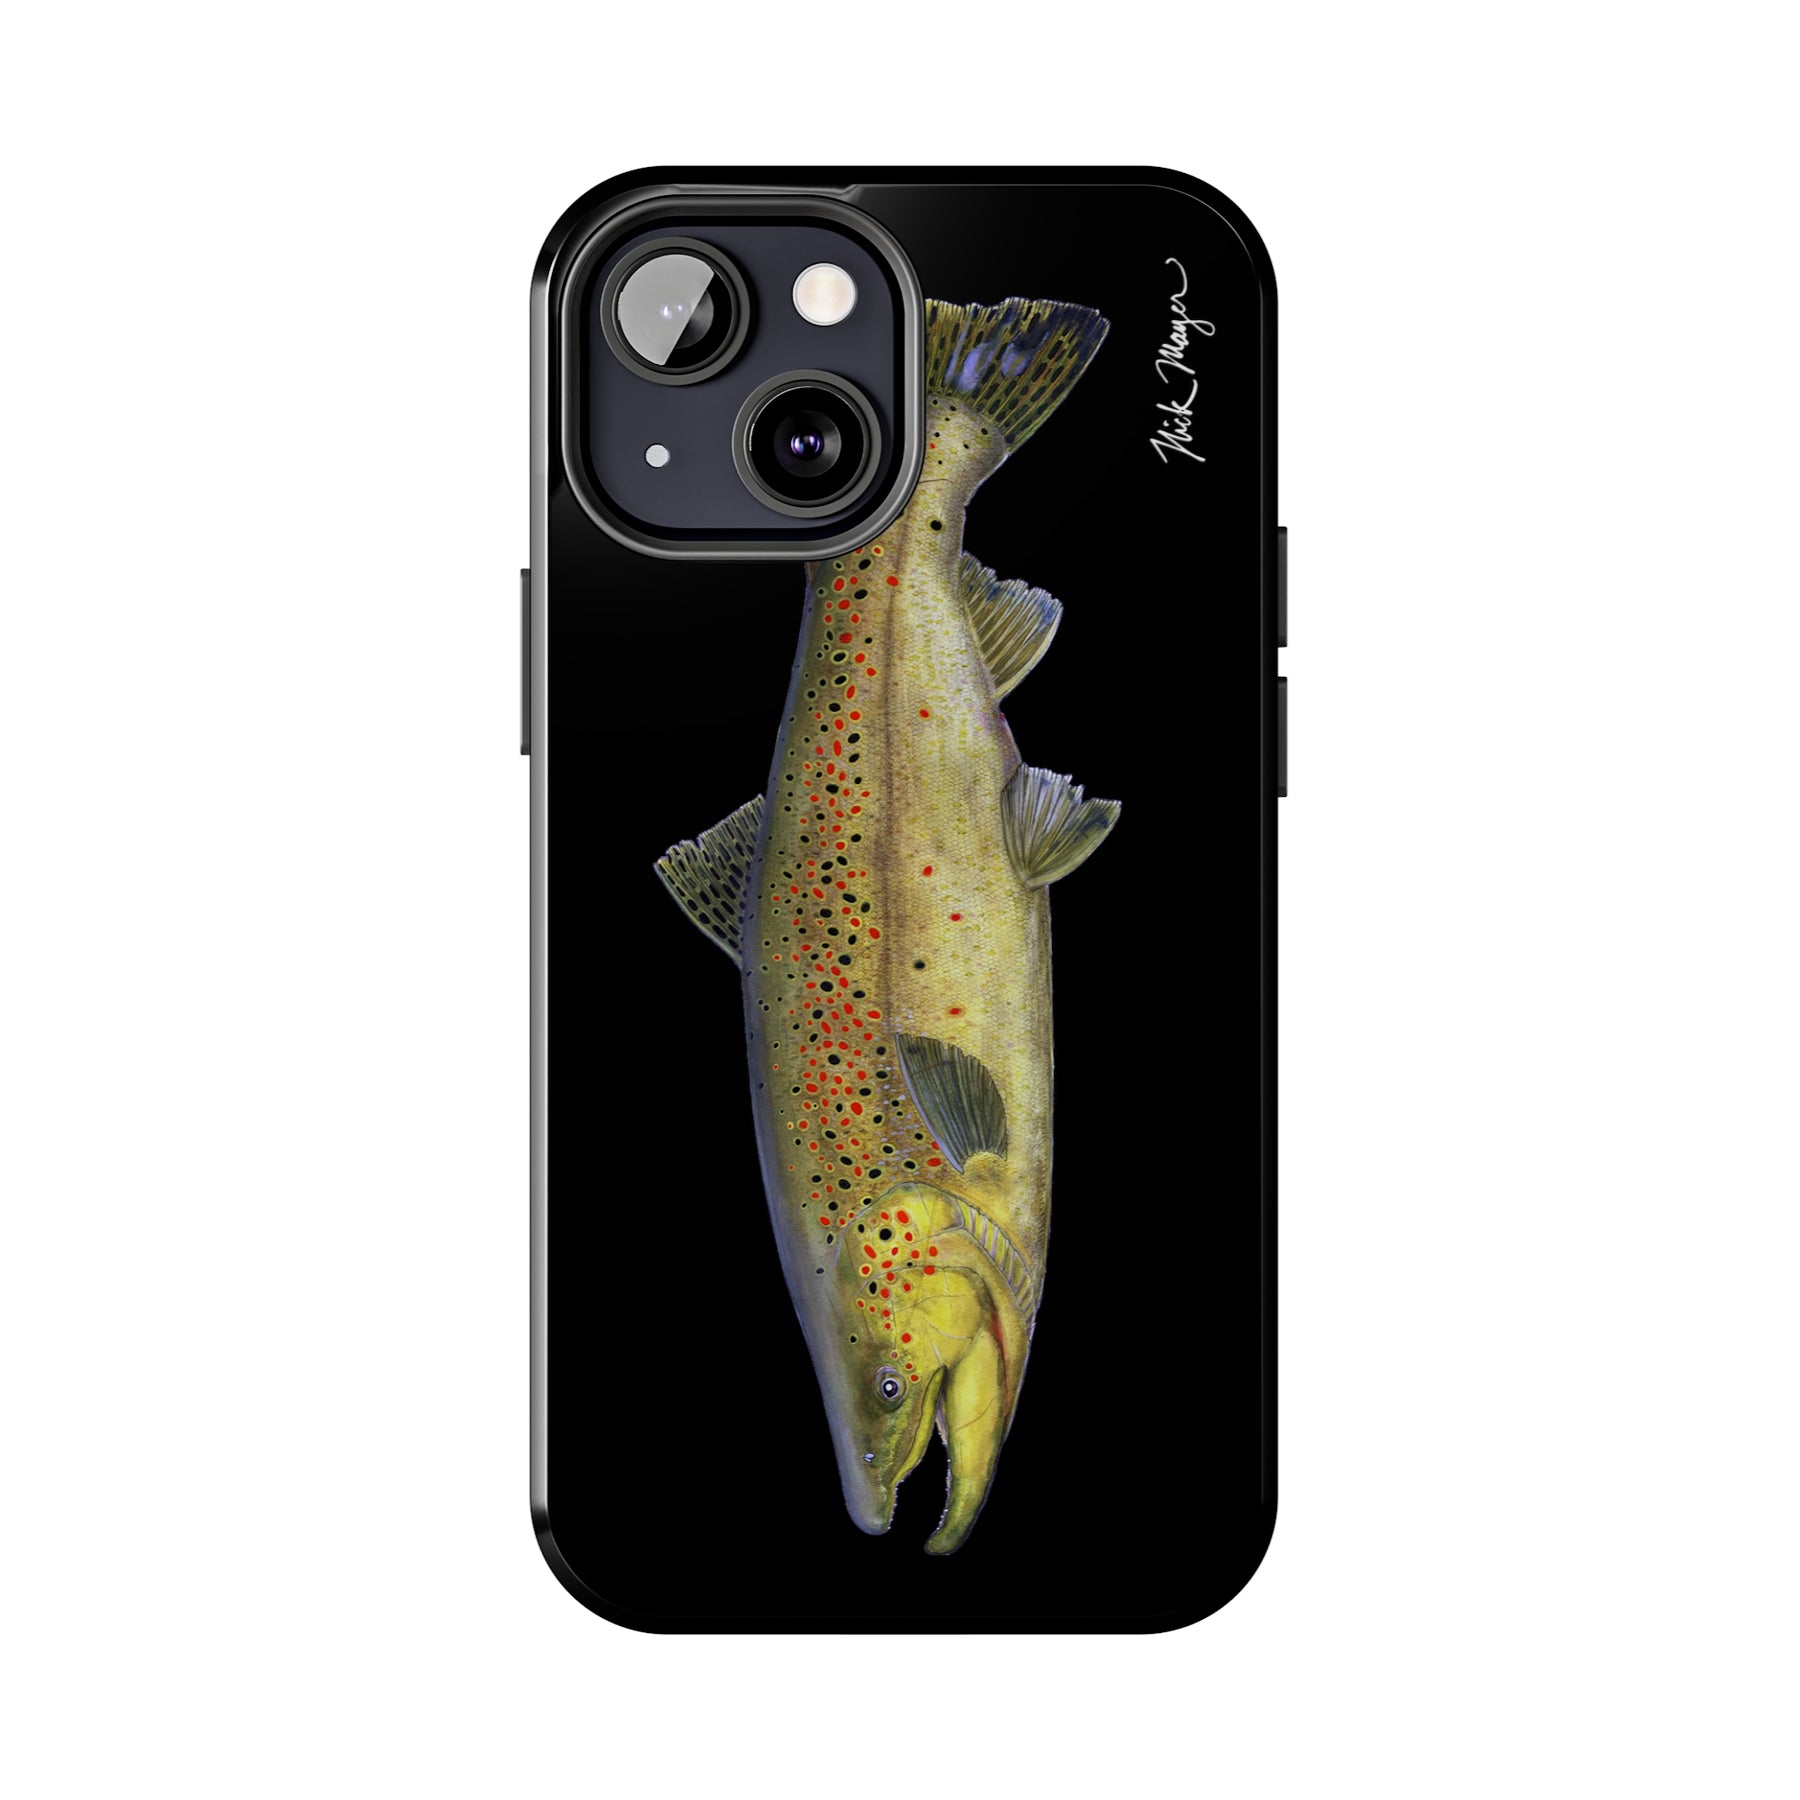 Brown Trout Black Phone Case (iPhone)